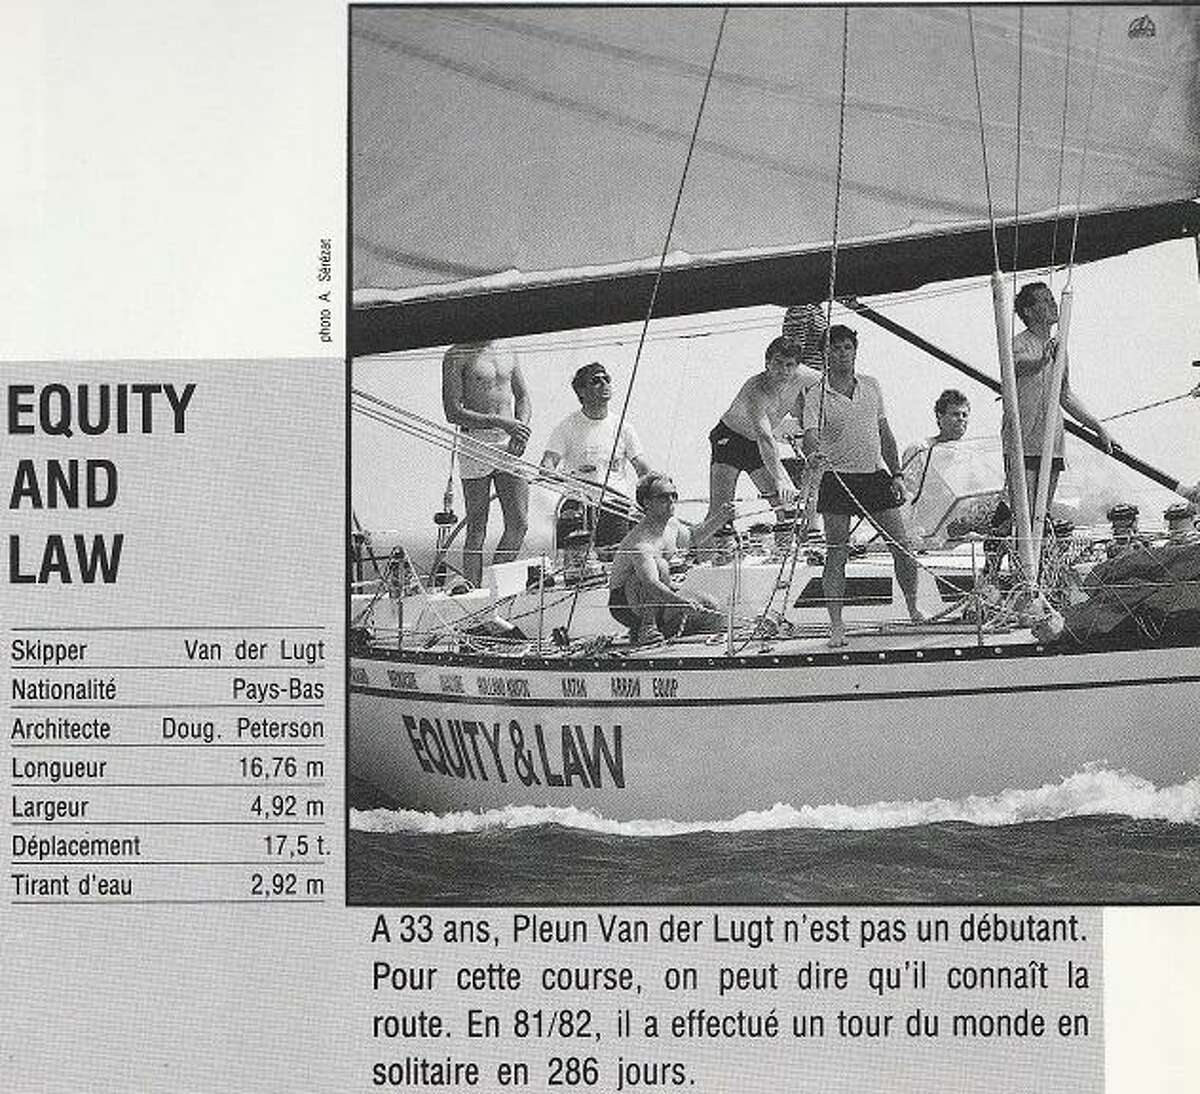 A Dutch crew competes with  Equity & Law in the 1985 Whitbread Around the World Yacht Race and finished 2nd in its class. The boat was renamed Outlaw when the late Paul Scarano purchased it in 1997.